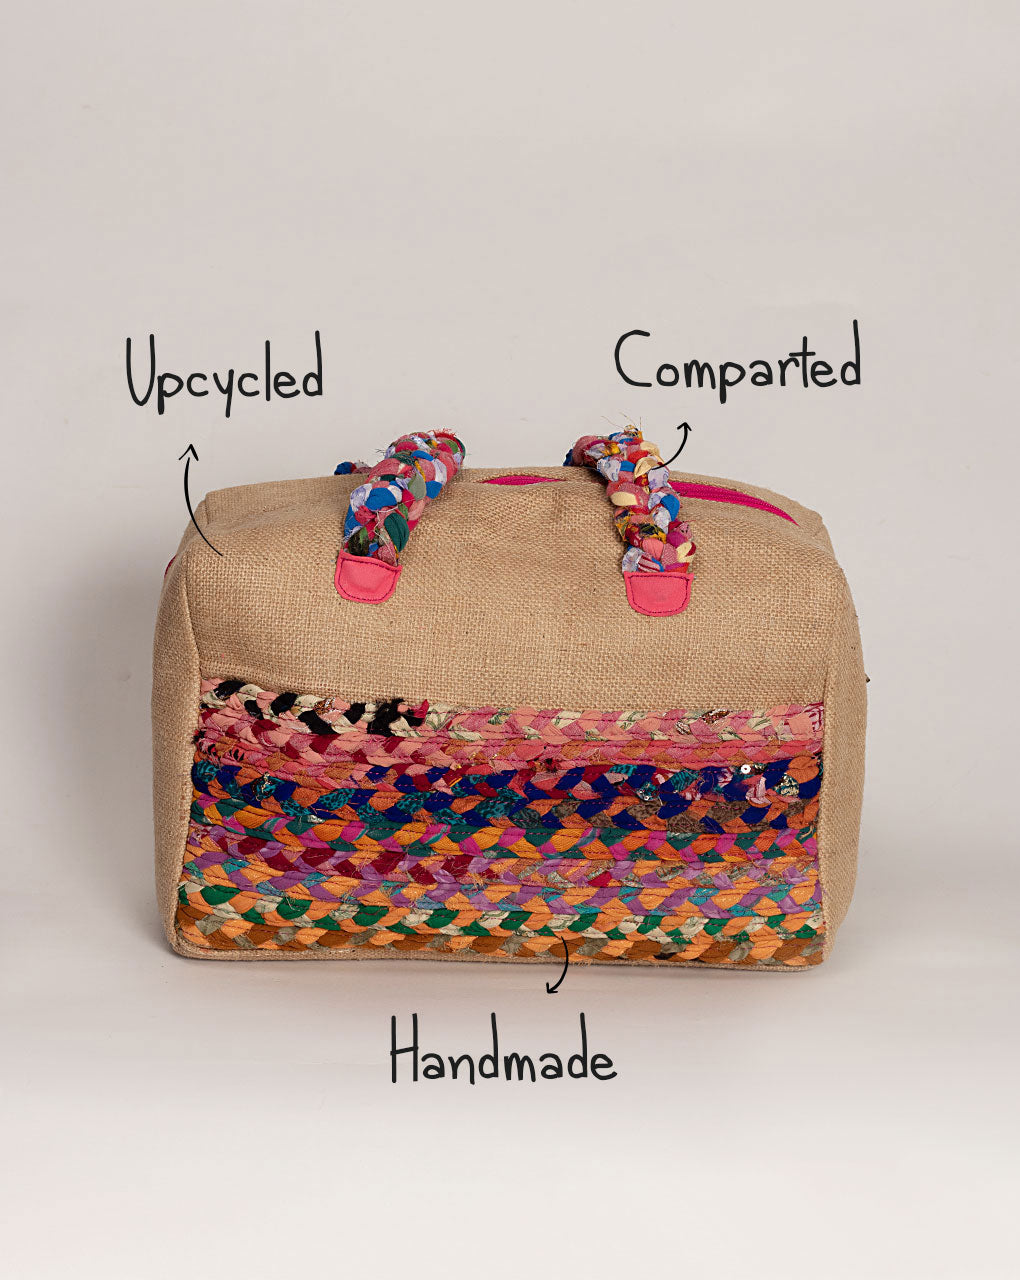 Handmade Jute Jute Bags For Wedding Favors And Jewelry 7x9cm Sac Toile De  Jutes Can Cus From Yy_dhhome, $12.04 | DHgate.Com